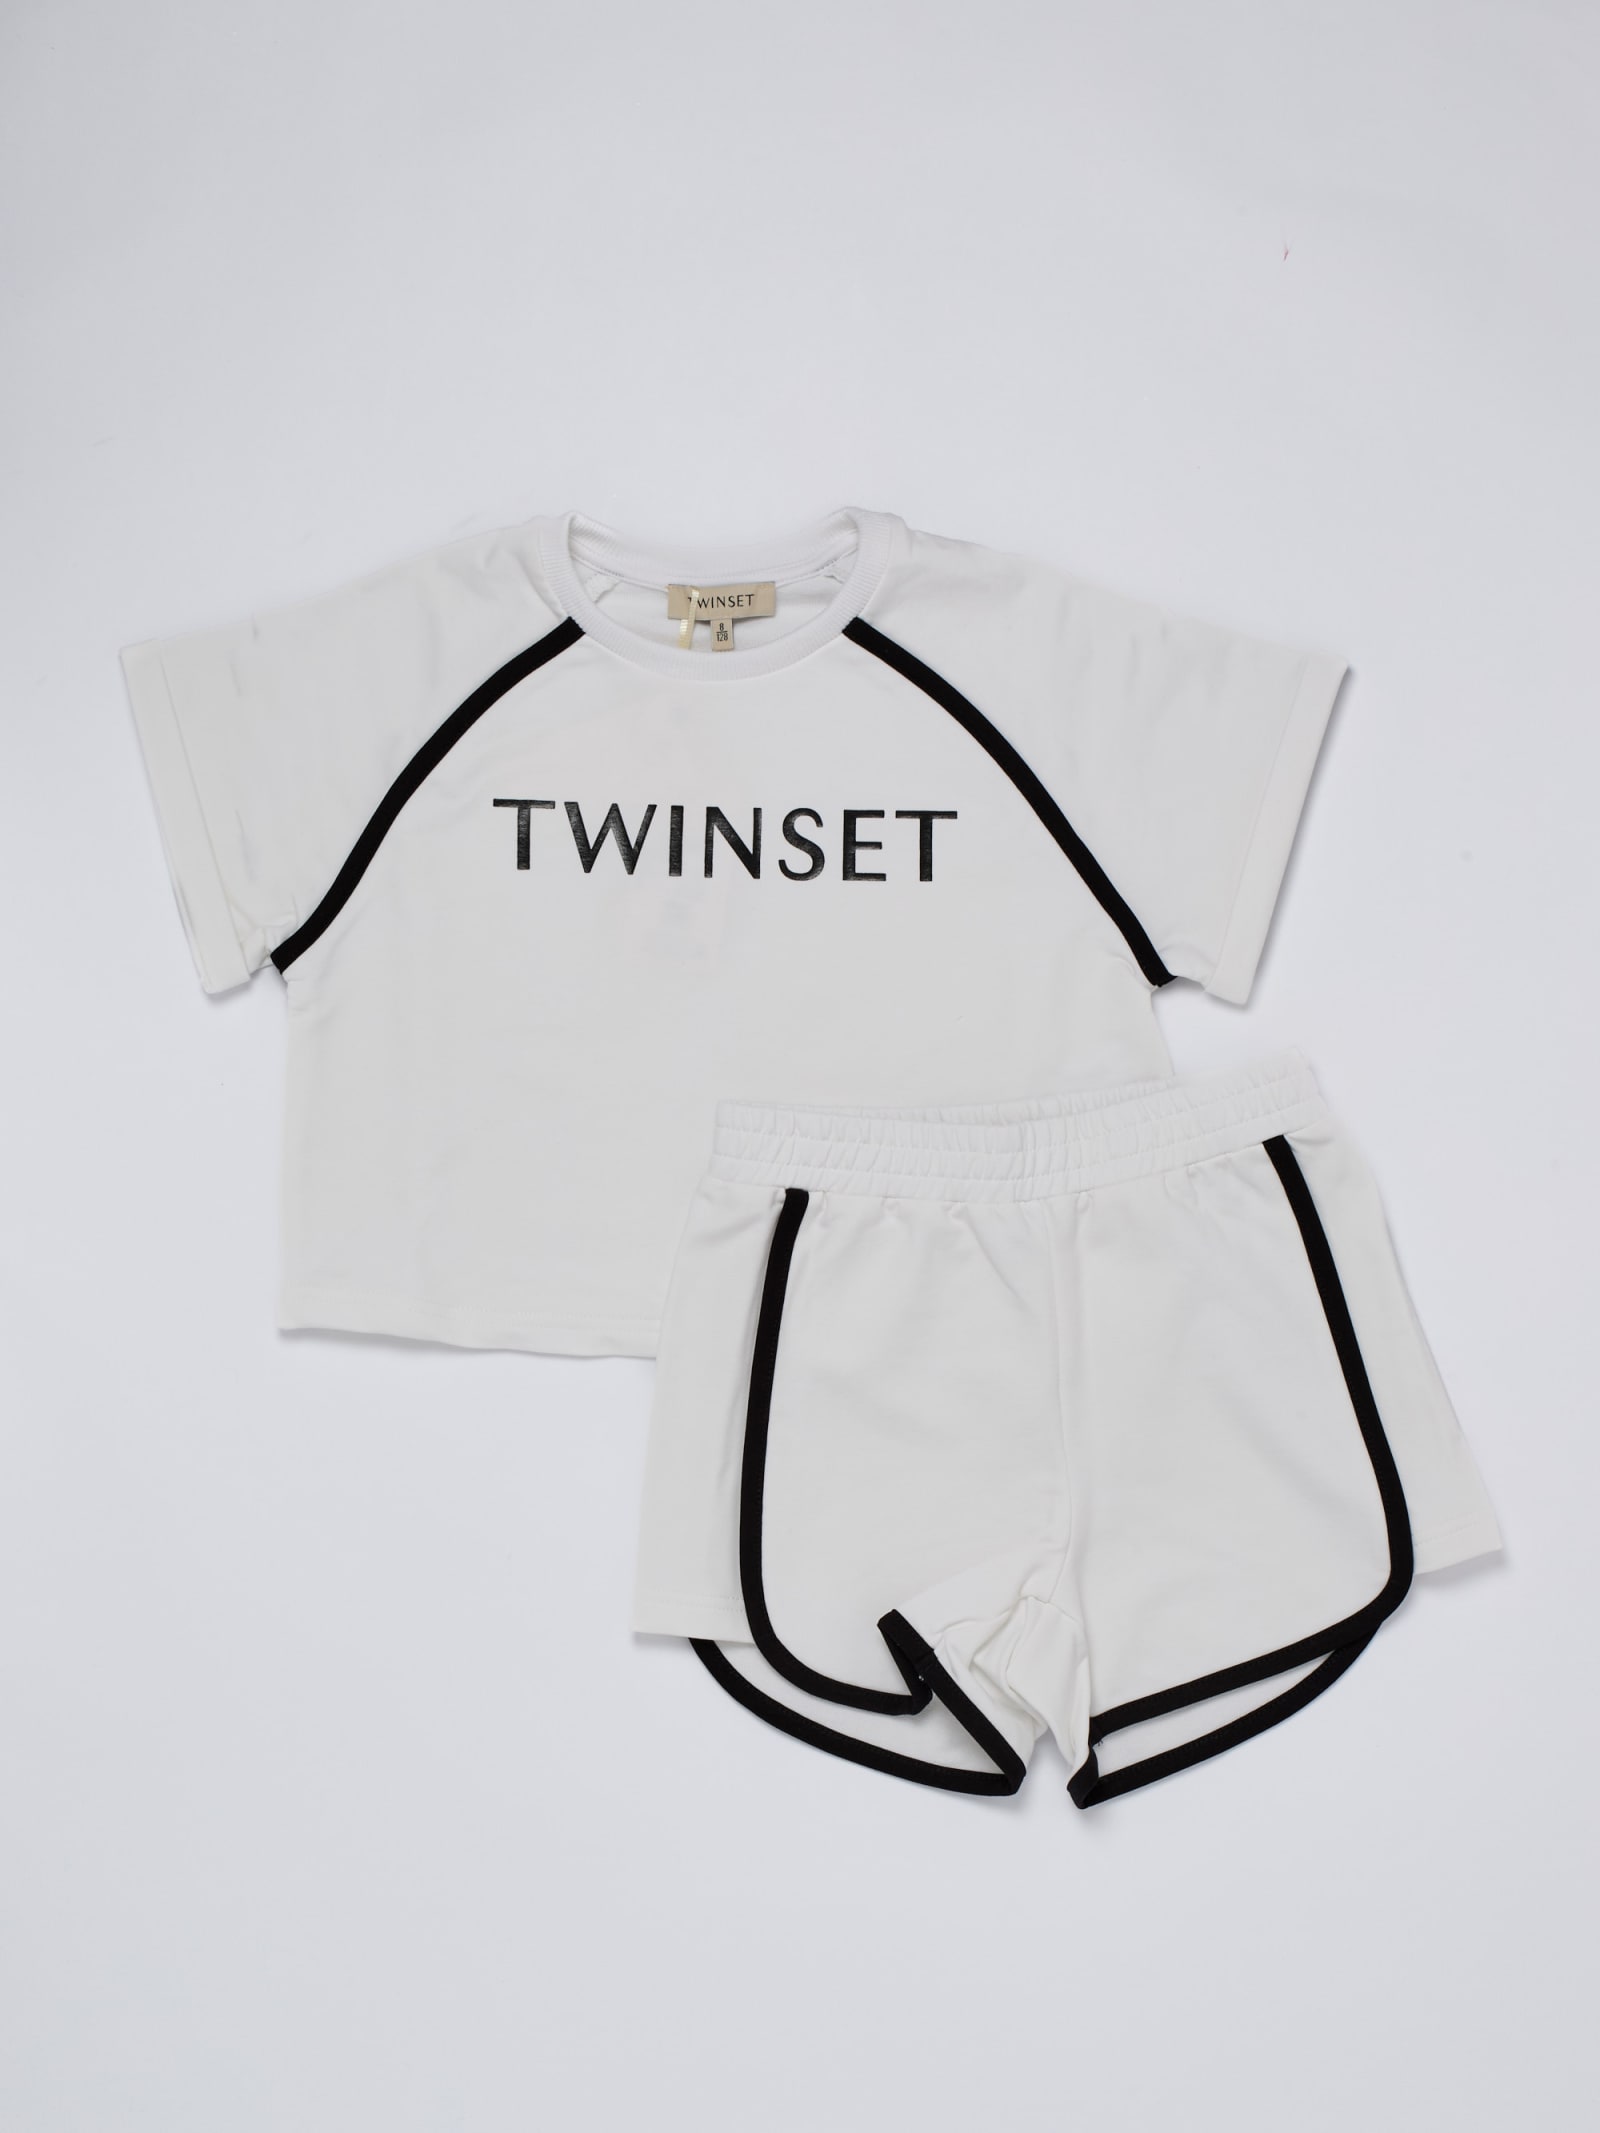 Twinset Kids' Suits Suit In Bianco-nero